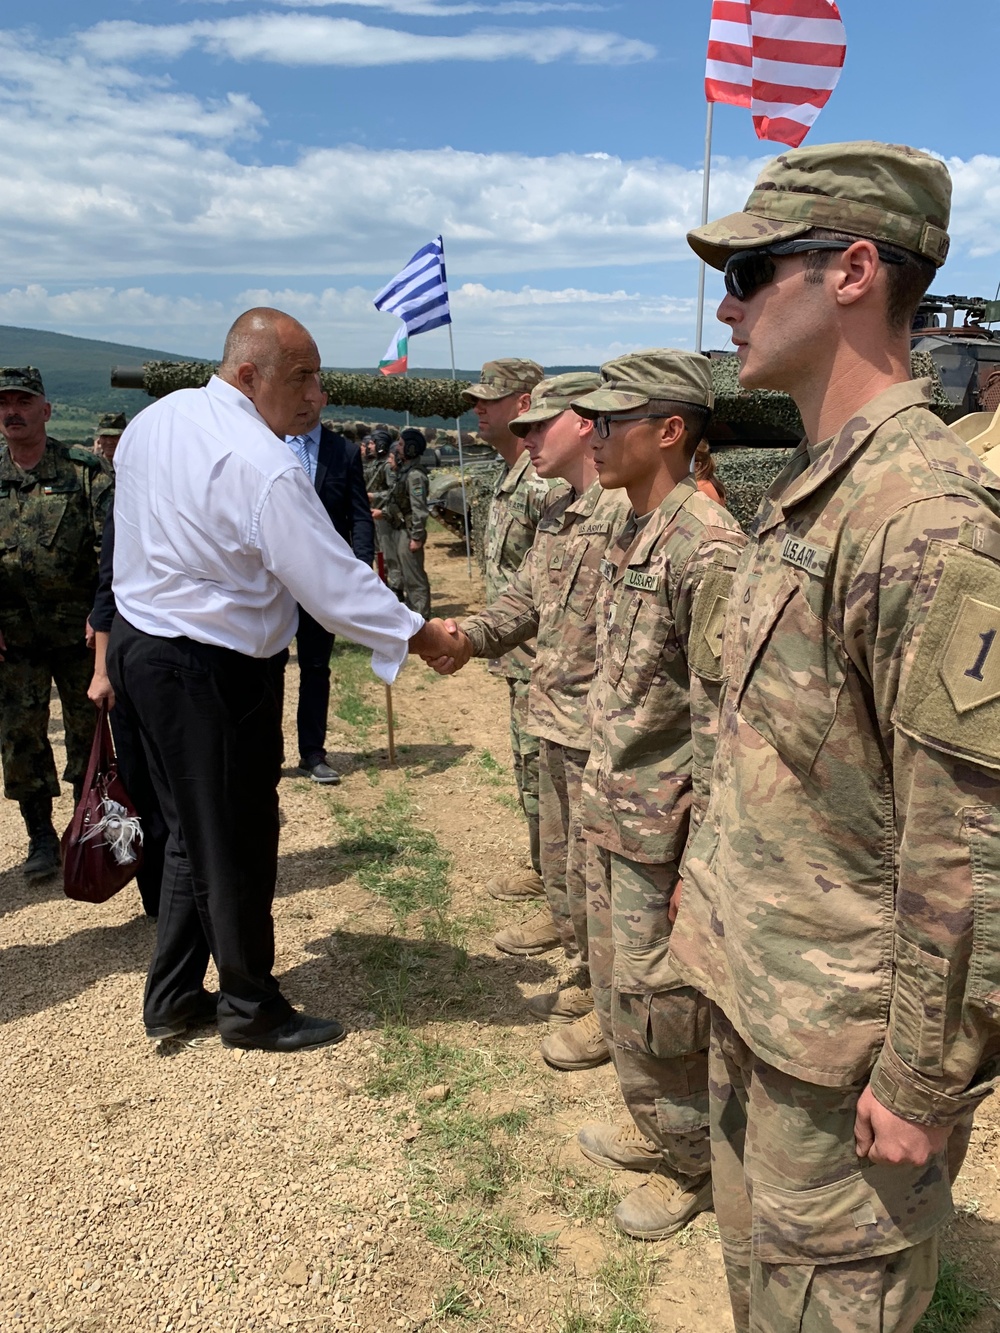 Bulgarian Prime Minister interacts with U.S. Soldiers